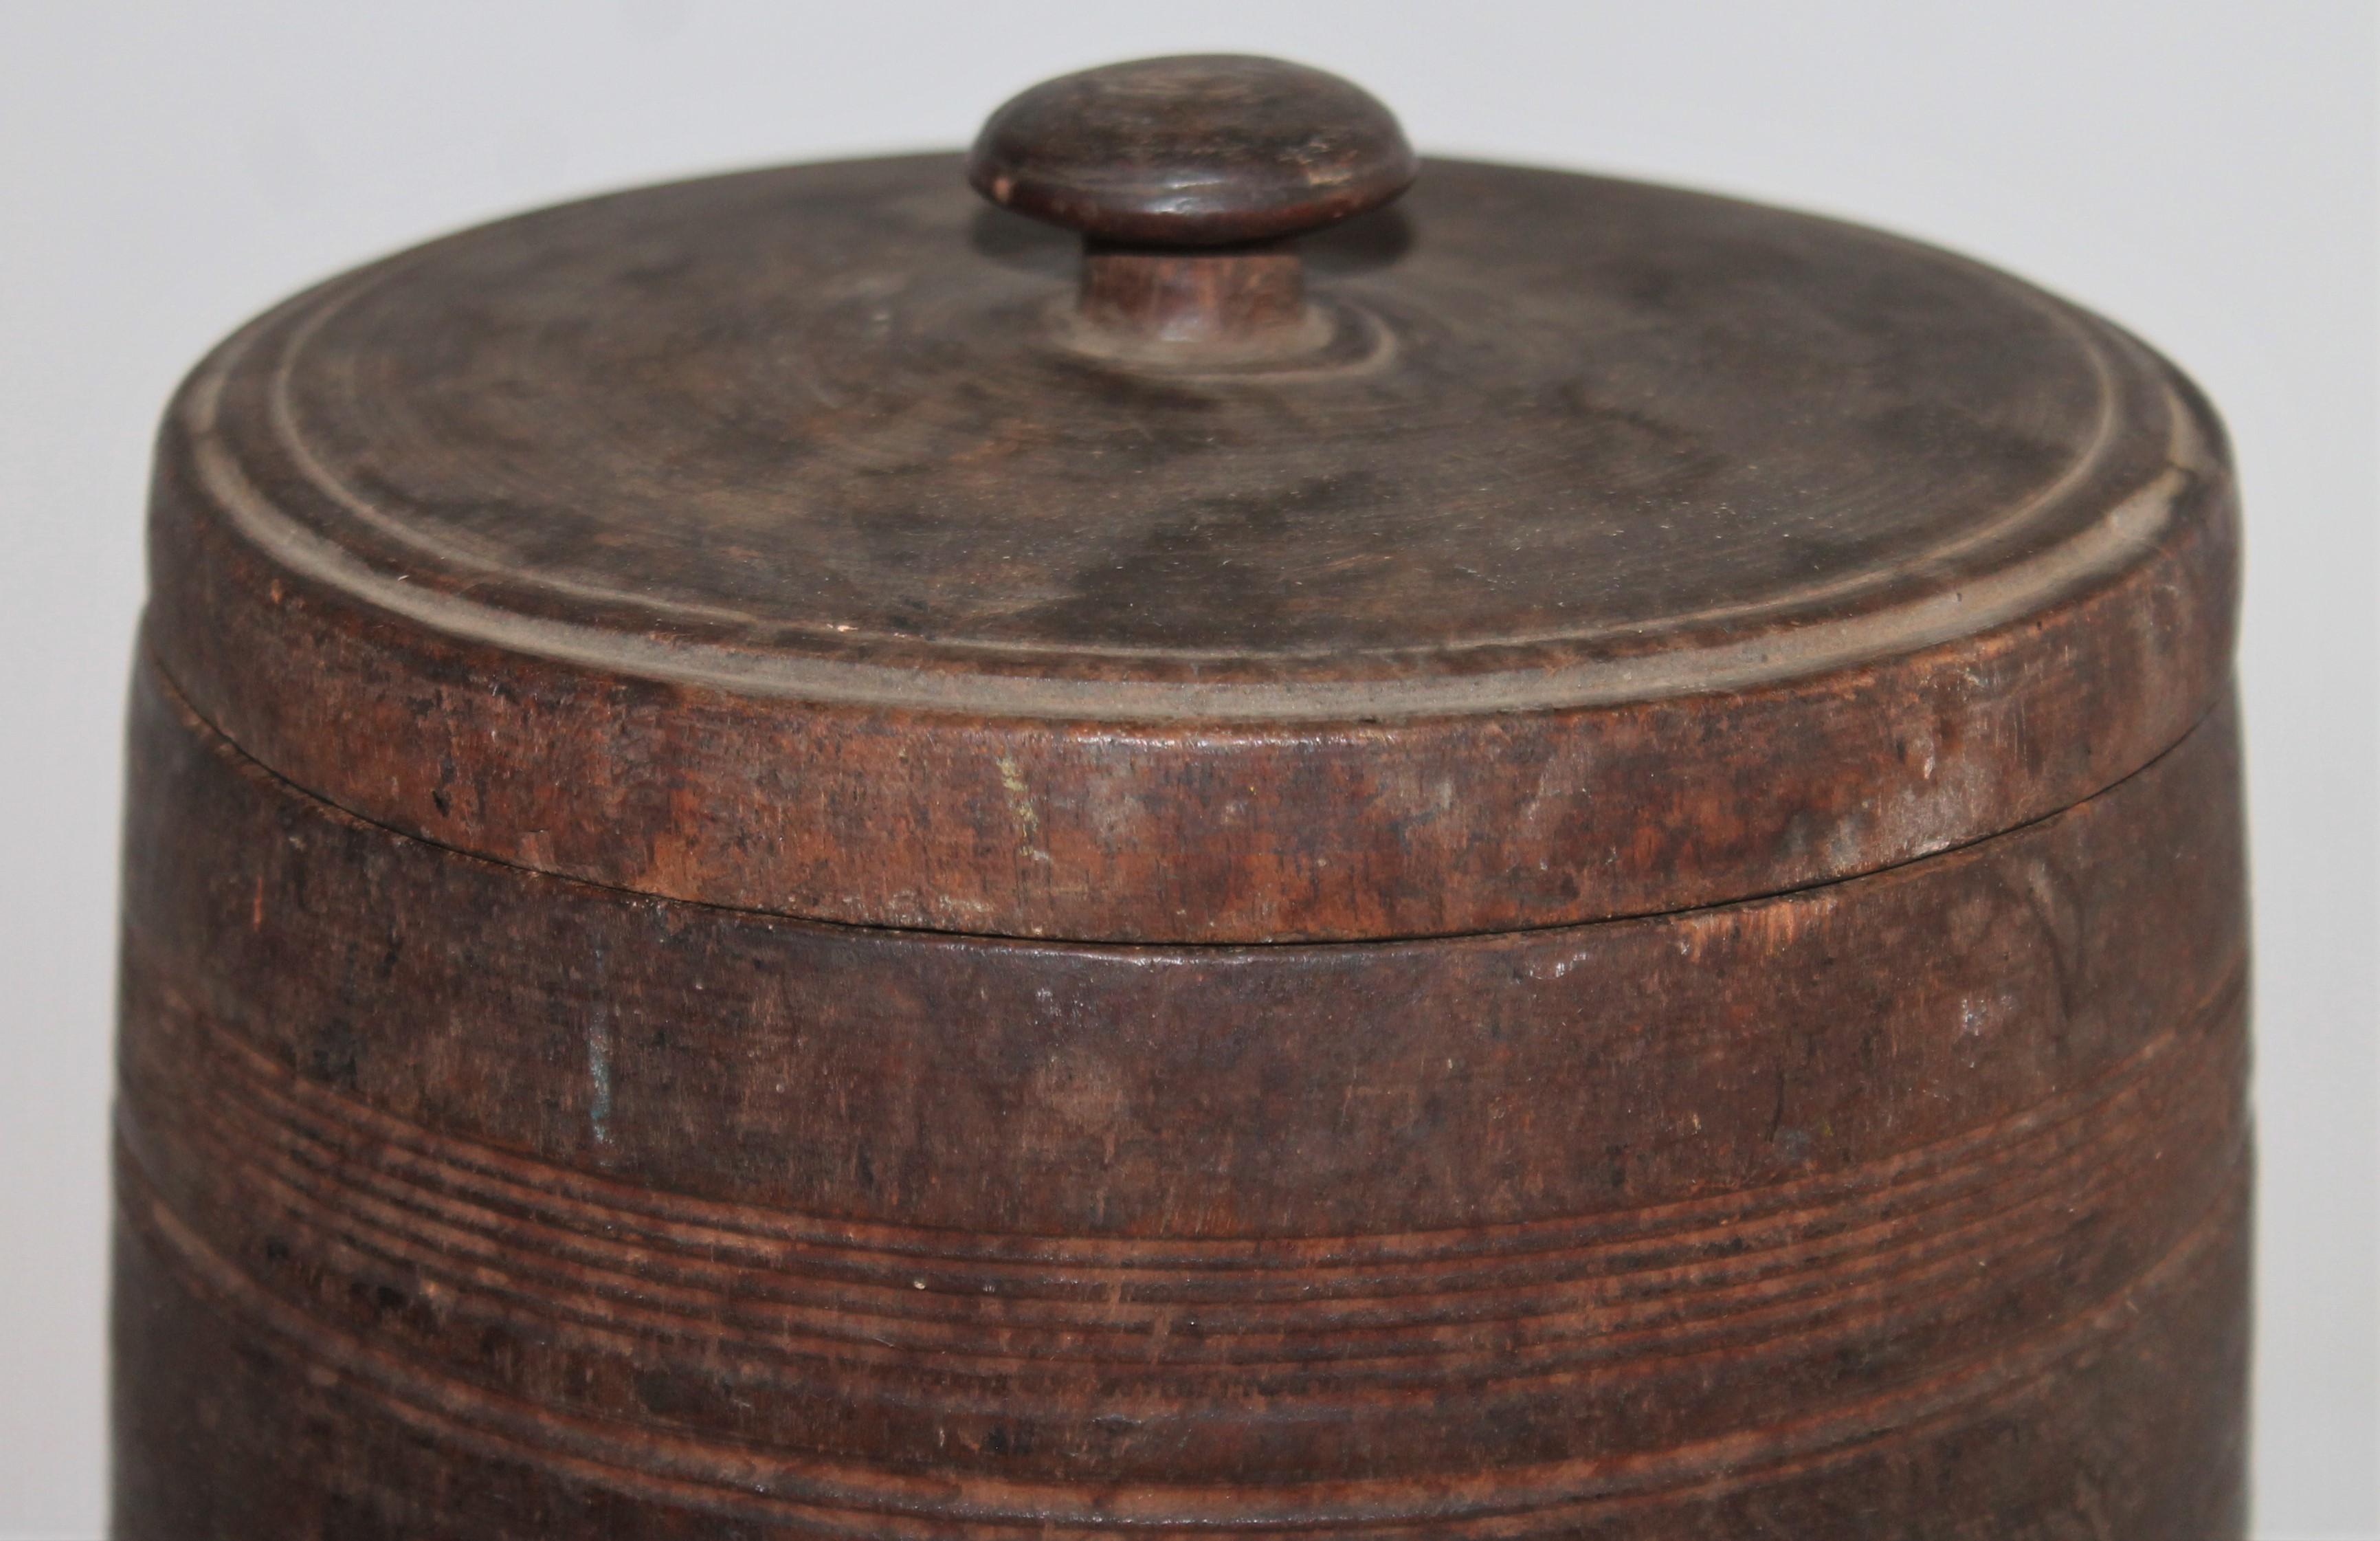 Hand-Crafted 19th Century Handmade Wood Canister W/ Lid